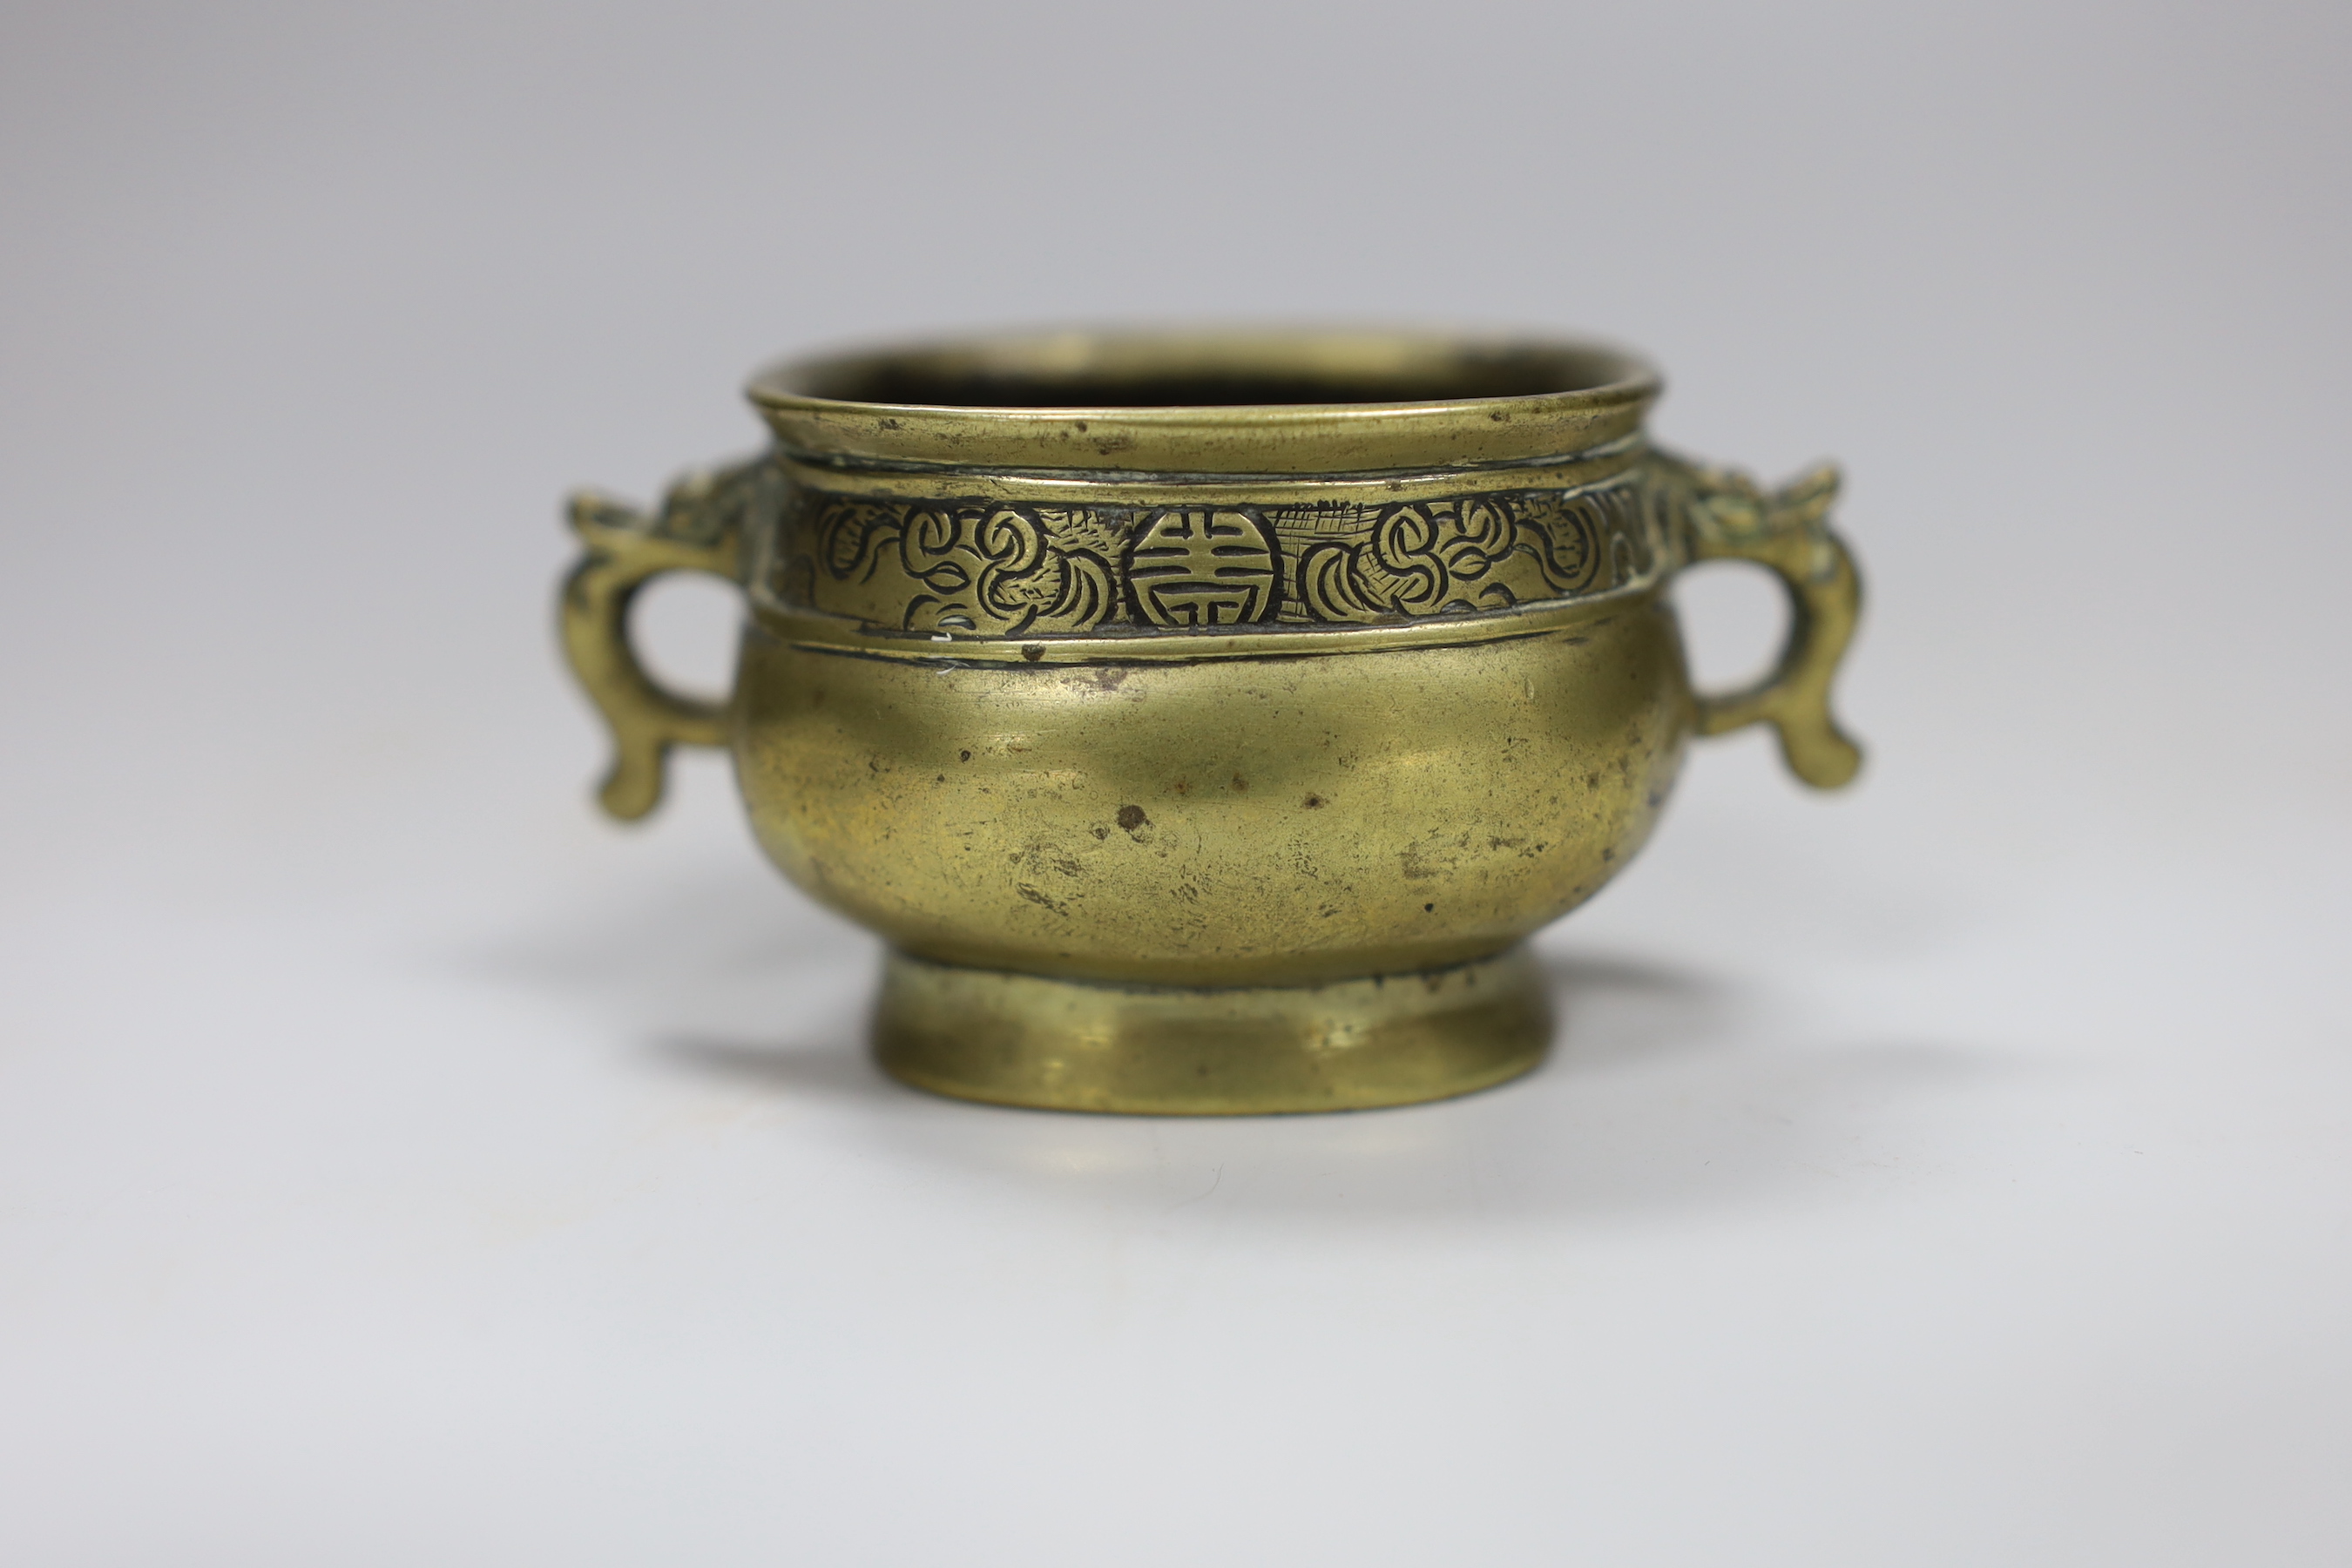 A Chinese miniature bronze censer, fanggui, Xuande six character mark, 18th/19th century, 8cm wide. Purchased in 1965 in Tsingtao on ship called 'Rushpool', Company: 'Sir Robert Ropner' on Chinese charter taking arms to 